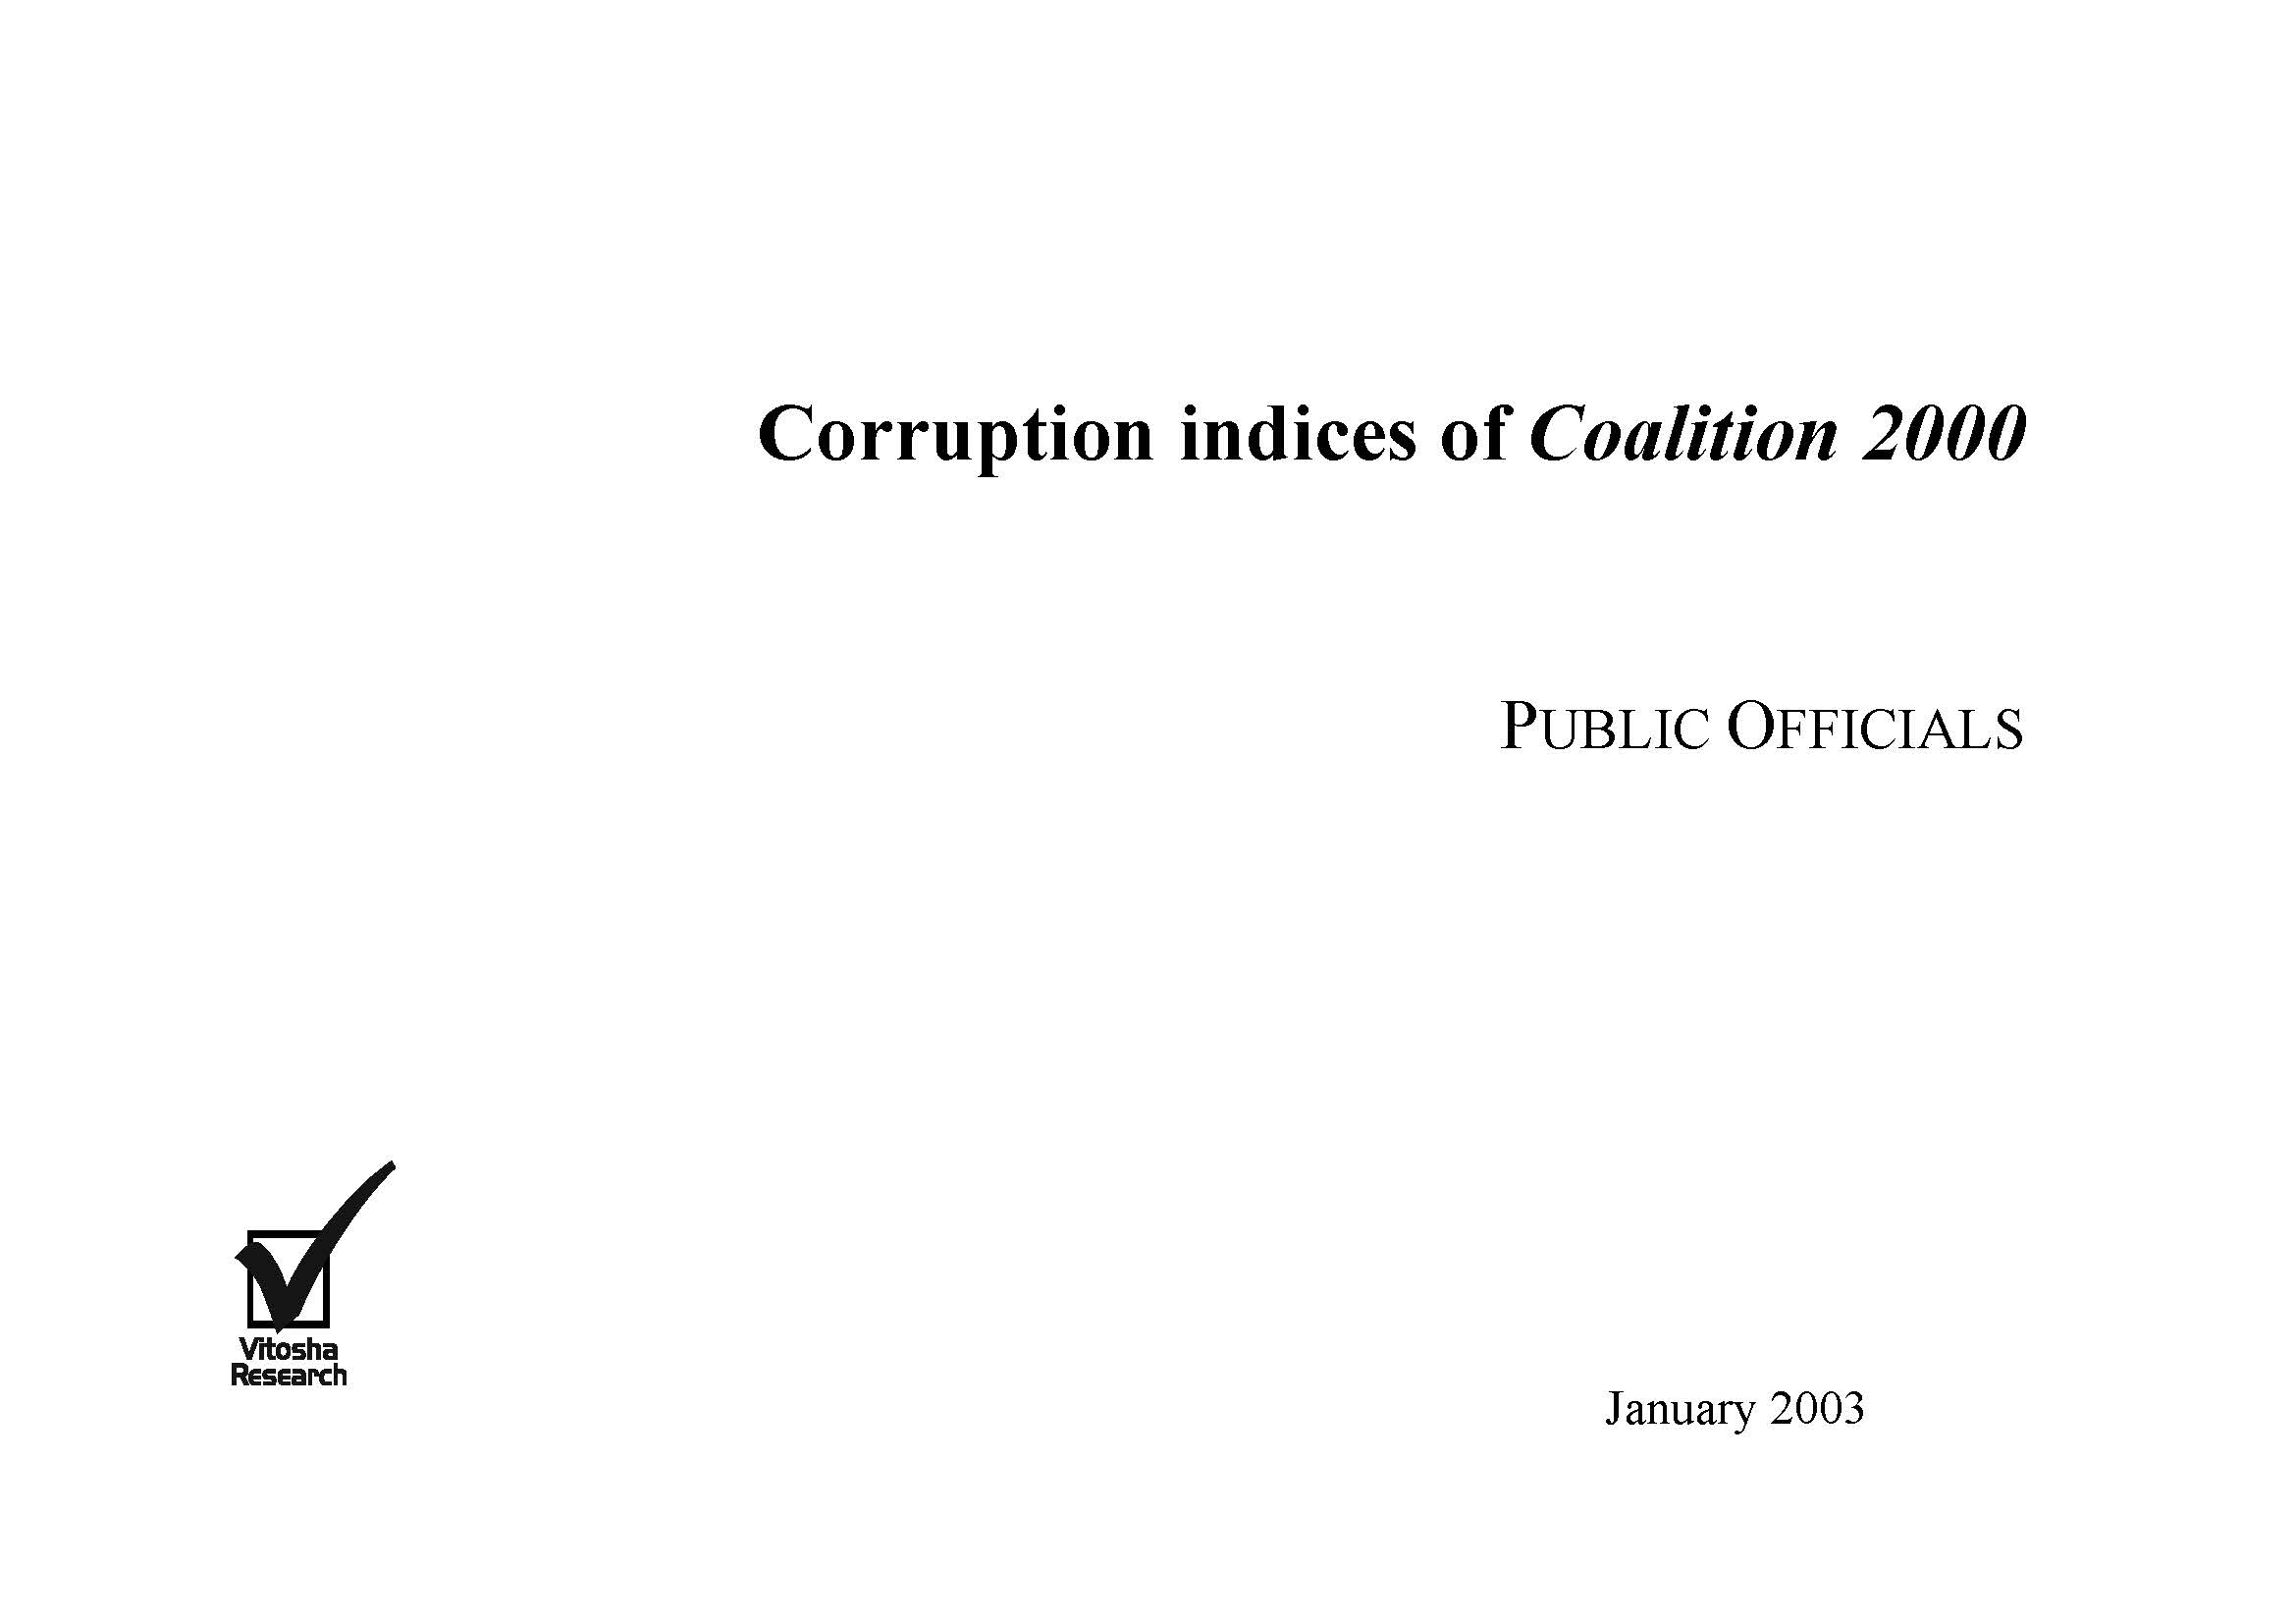 Corruption Indices of Coalition 2000, Public Sector Officials January 2003